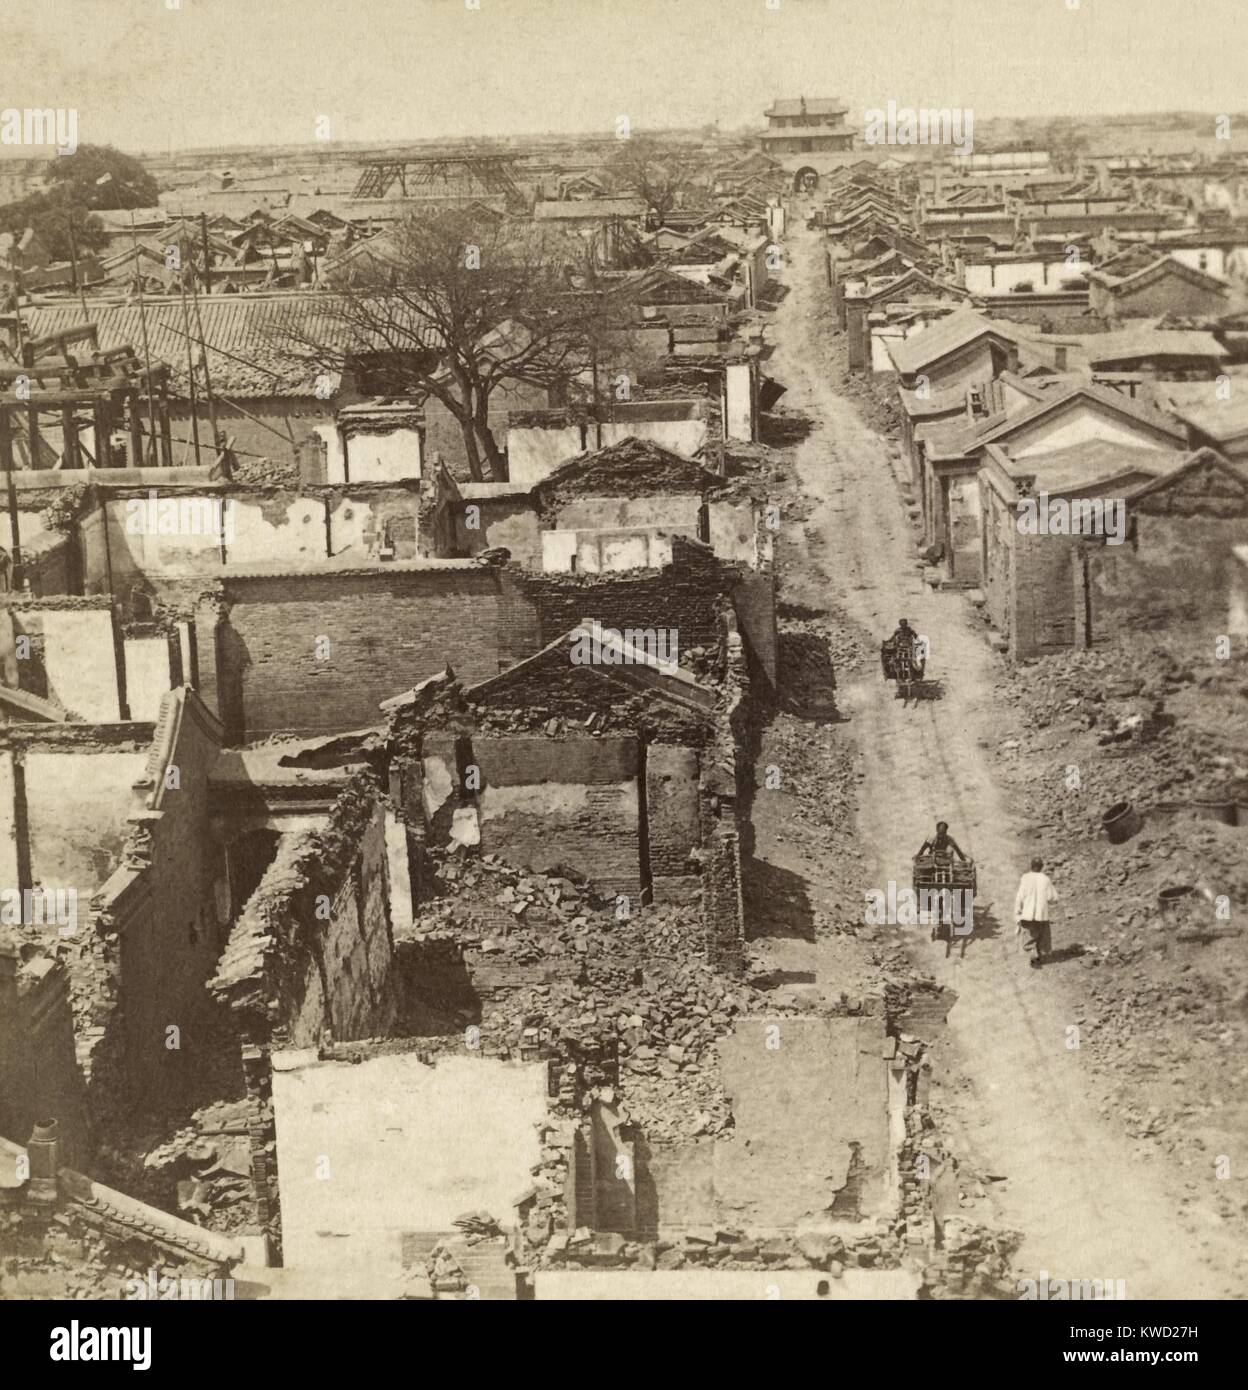 War-damaged Tianjin (Tientsin), China in July 1900 during the Box Rebellion. Its foreign quarter was besieged by the Boxers in June. On July 13-14, the eight nation allied force of 20,000 troops, took over Tianjin, as the first obstacle on their way the Beijing. Aggressive looting and massacre was committed by the Japanese and Russian soldiers, but soldiers of all nation took part  (BSLOC_2017_20_26) Stock Photo